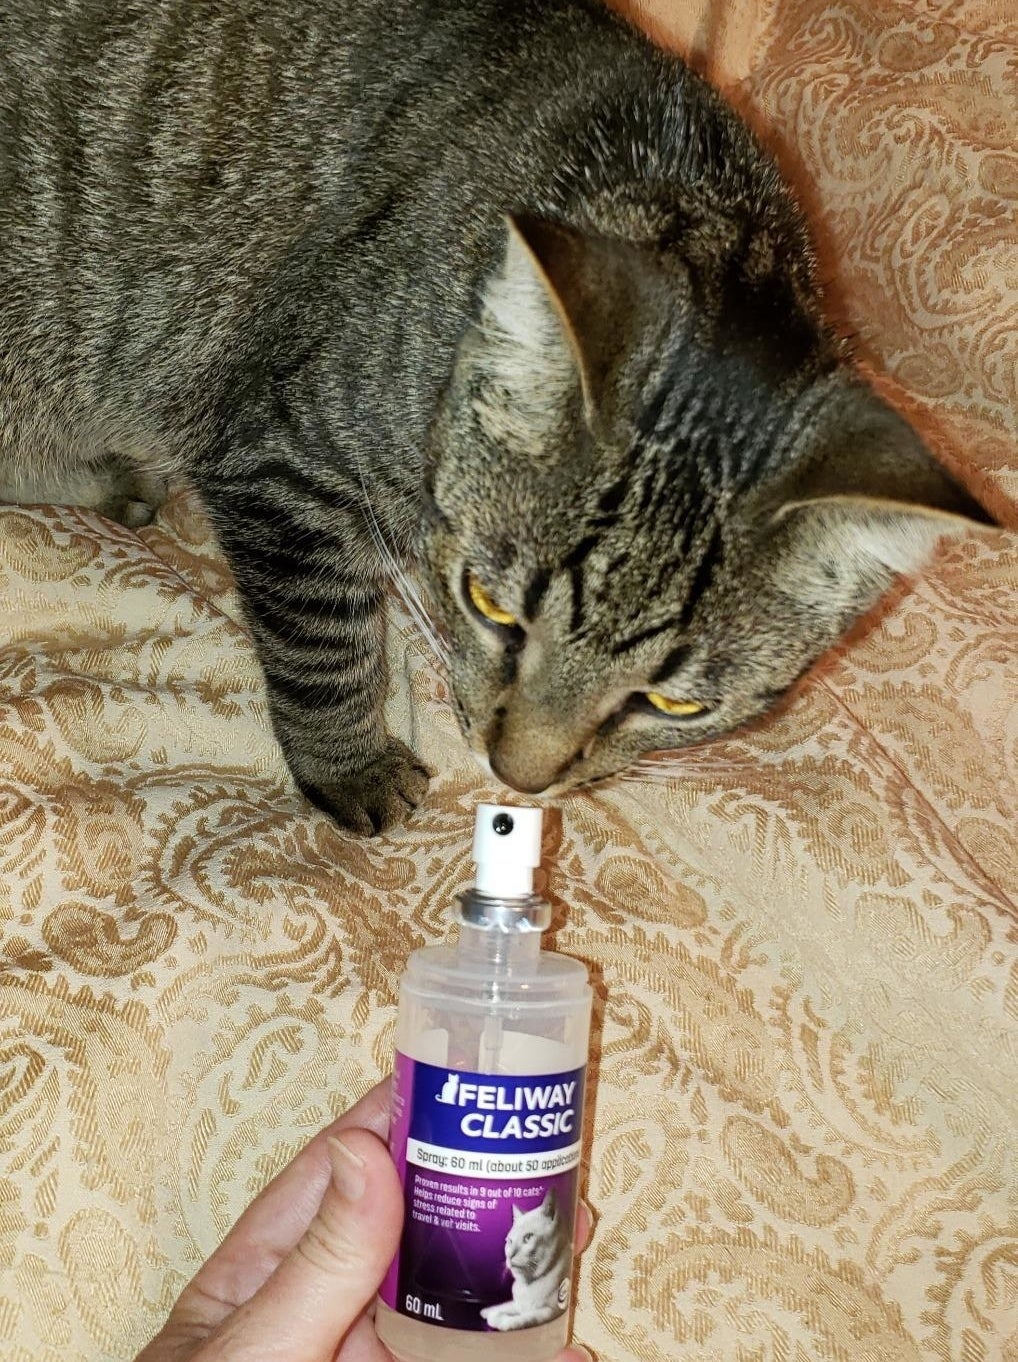 A person&#x27;s hand holding the Feliway Classic spray and a cat sniffing it